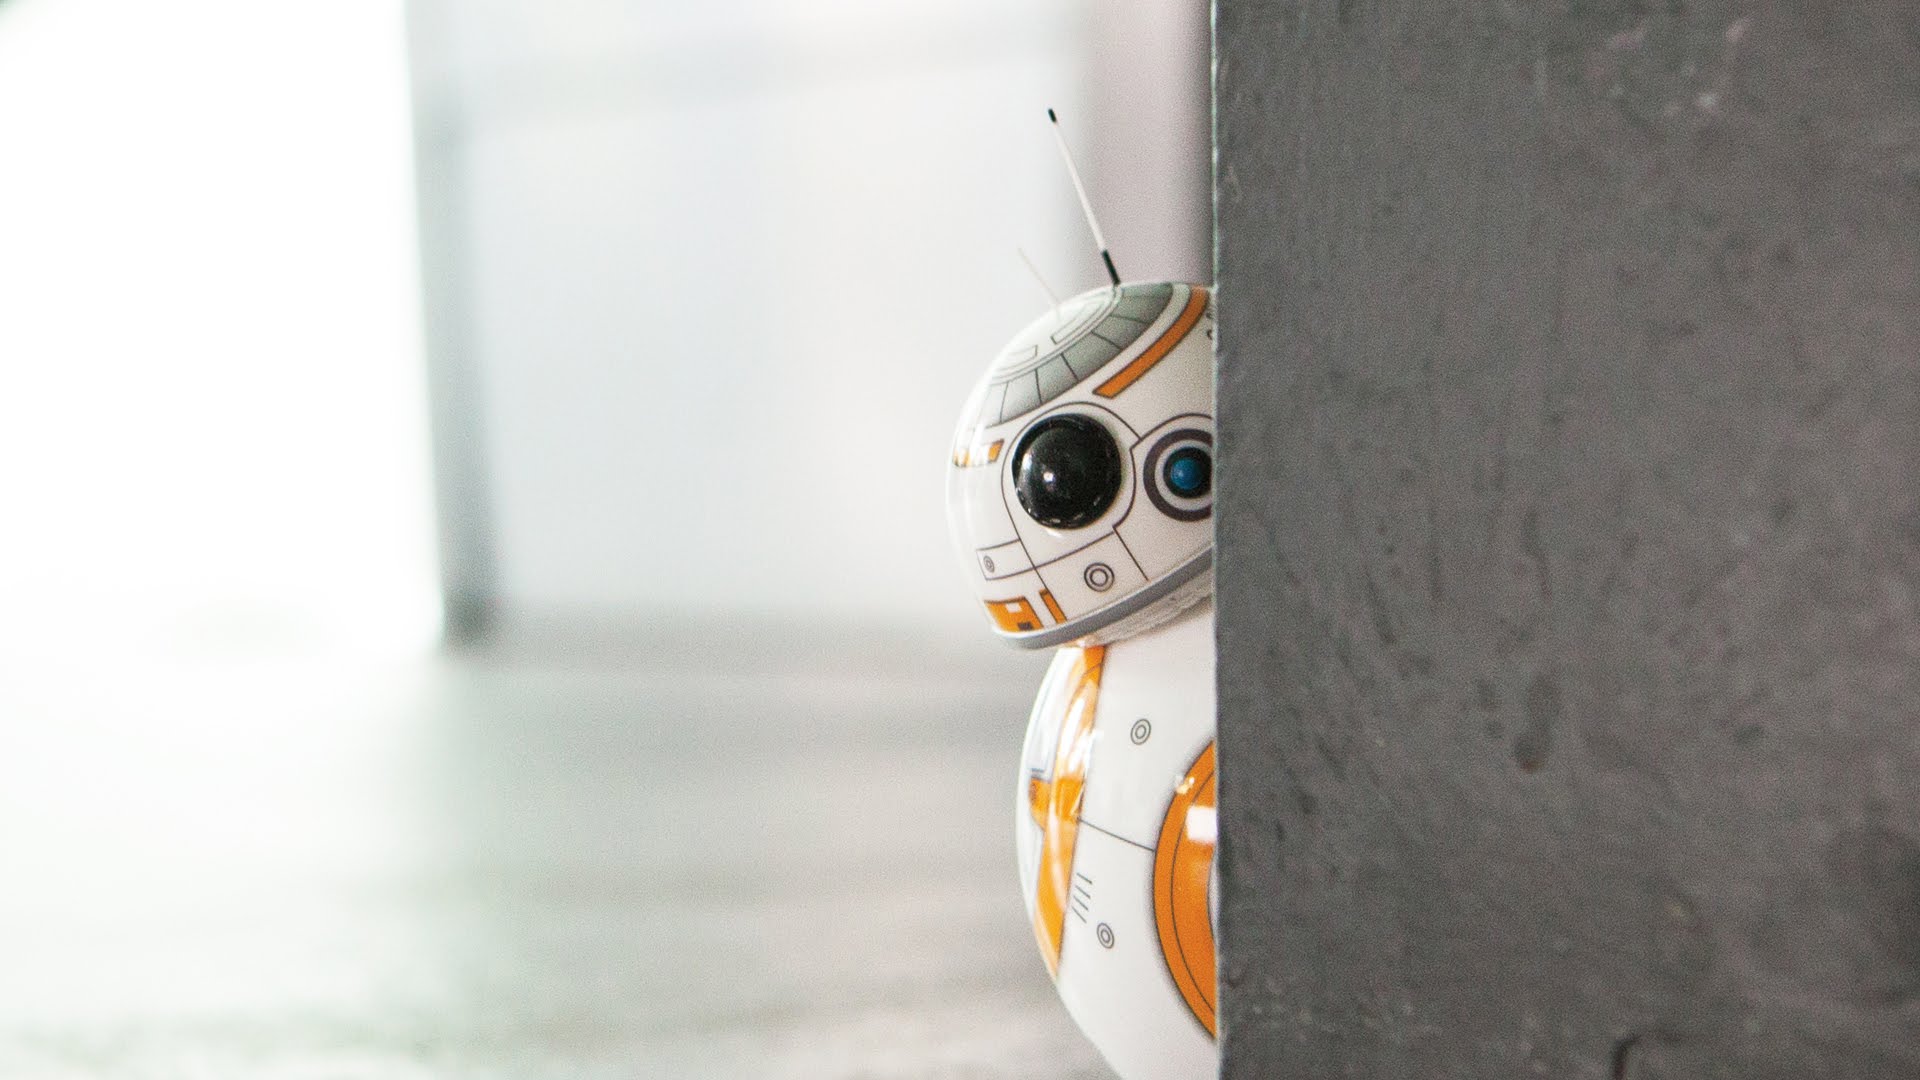 Meet Bb The Awesome New Star Wars Force Awakens Droid